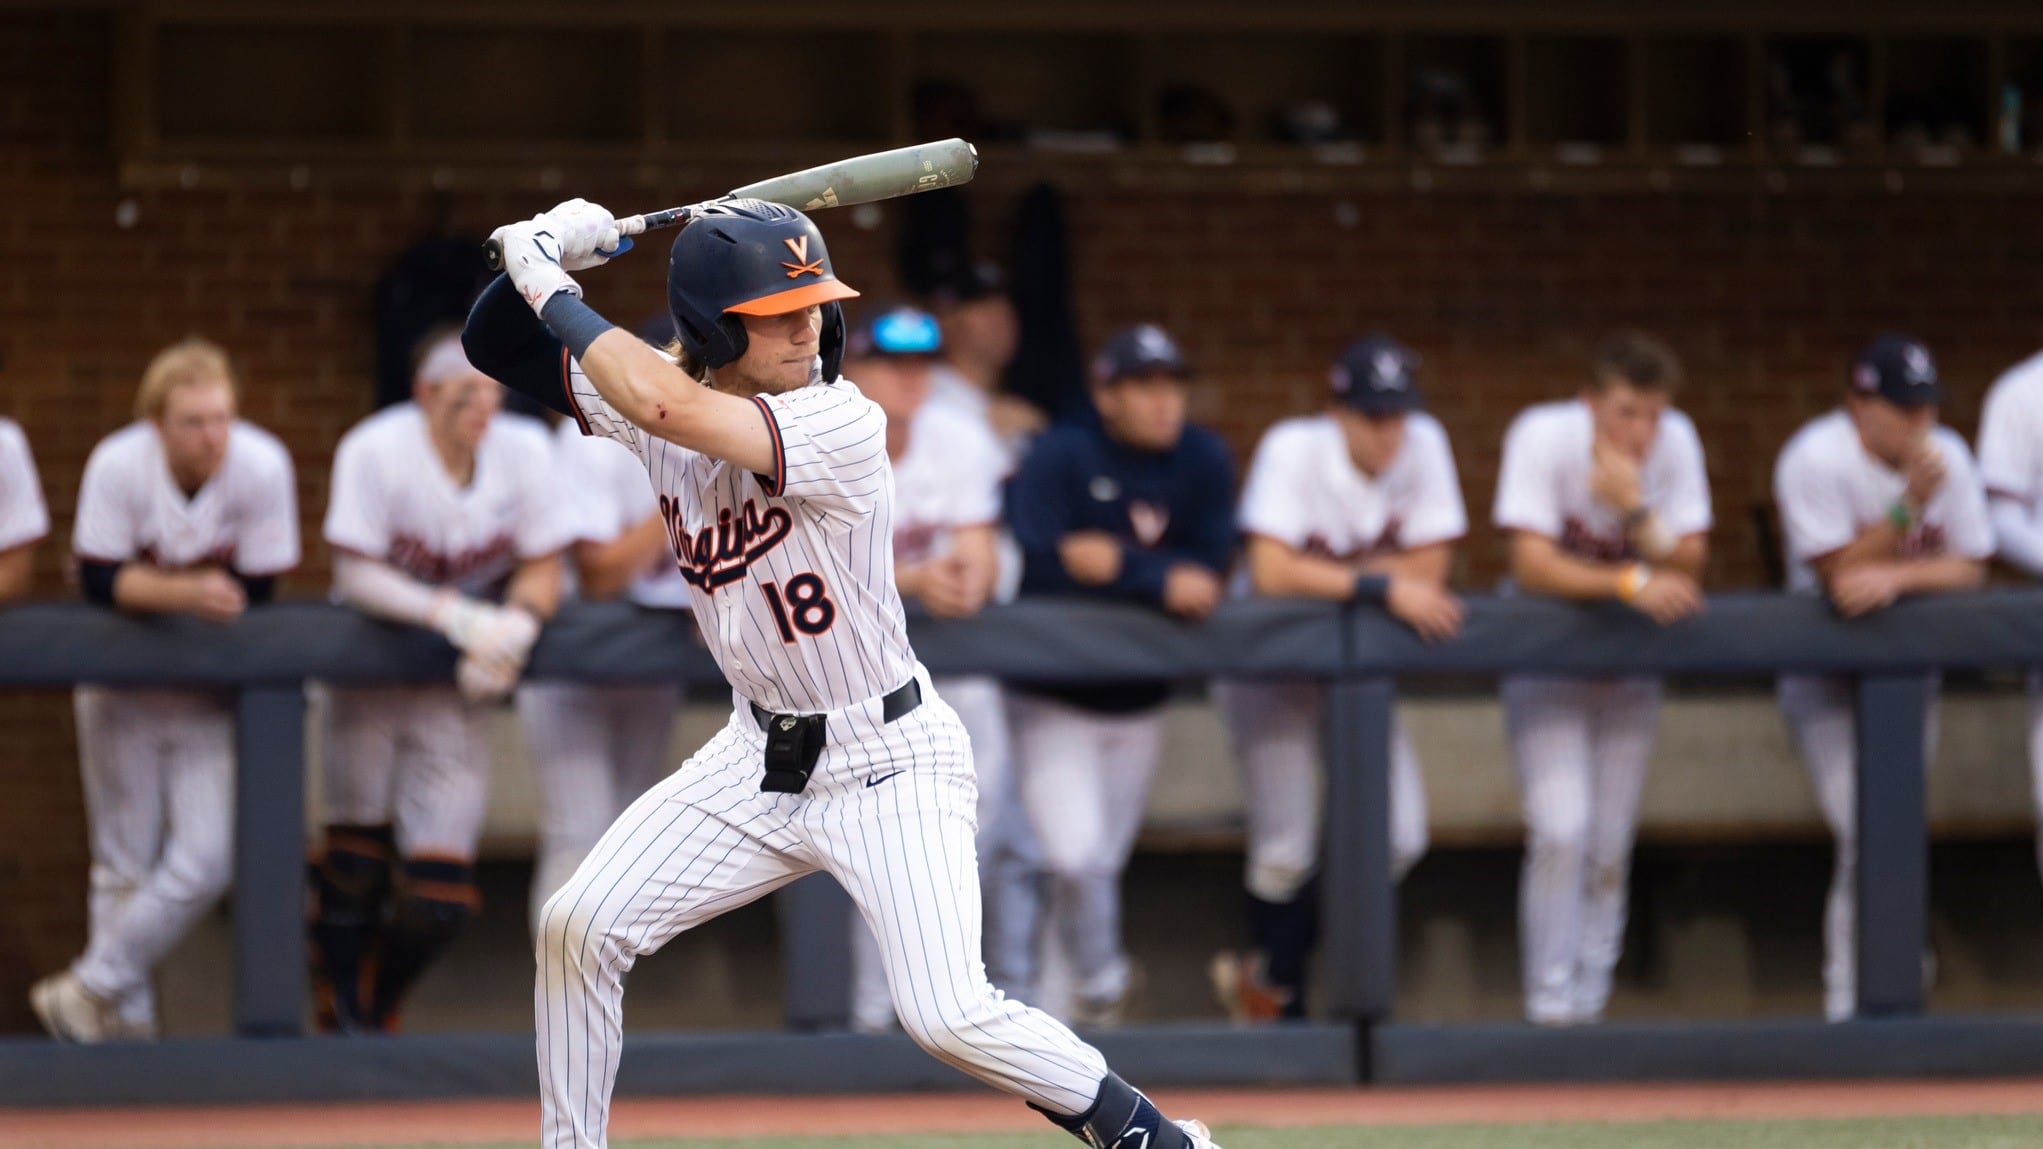 Virginia Baseball Wins 8-7 in 11th Inning to Even Series with Georgia Tech